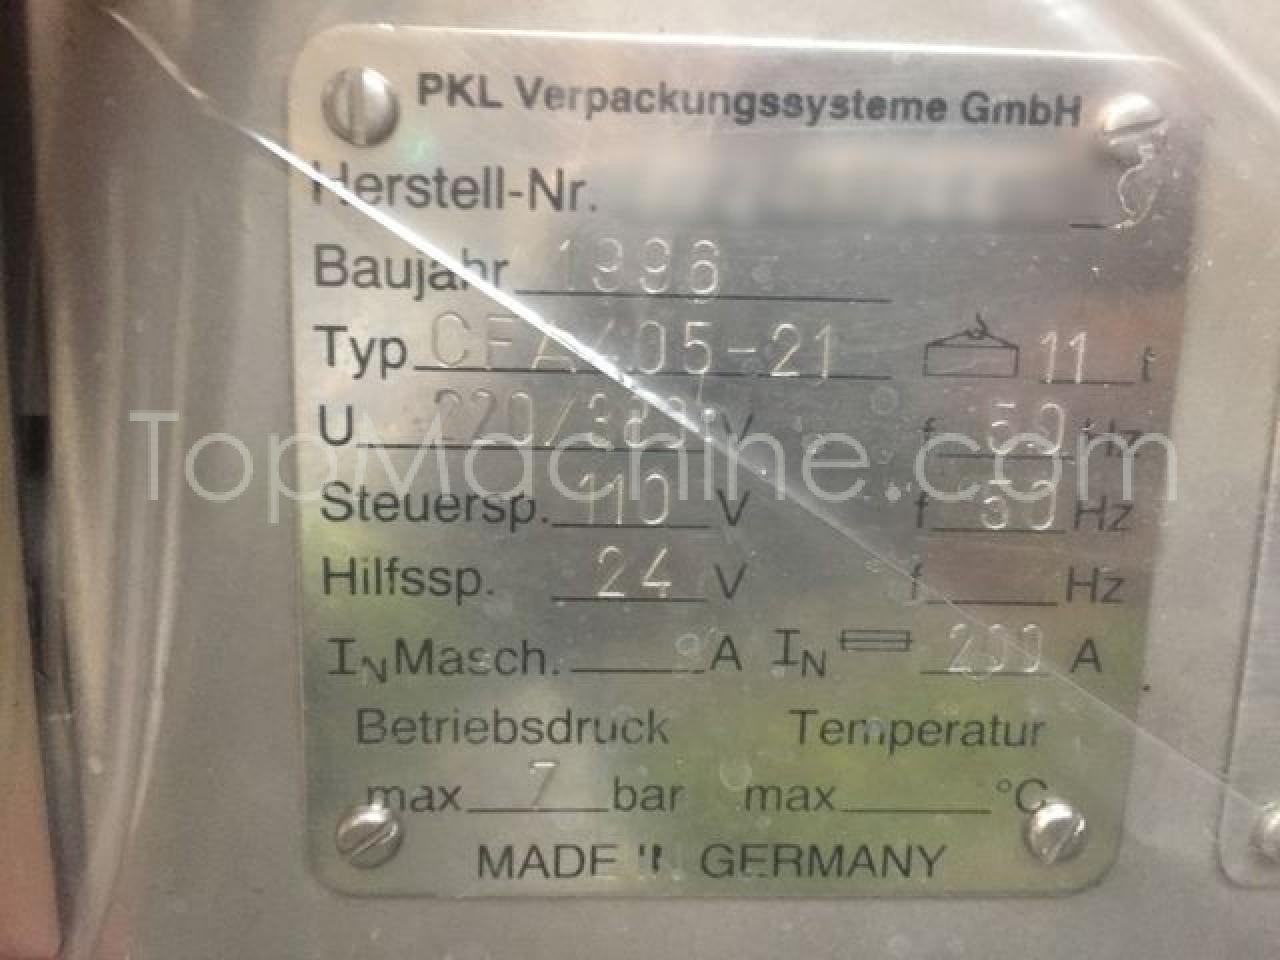 Used SIG Combibloc CFA 405-21 Dairy & Juices Aseptic filling